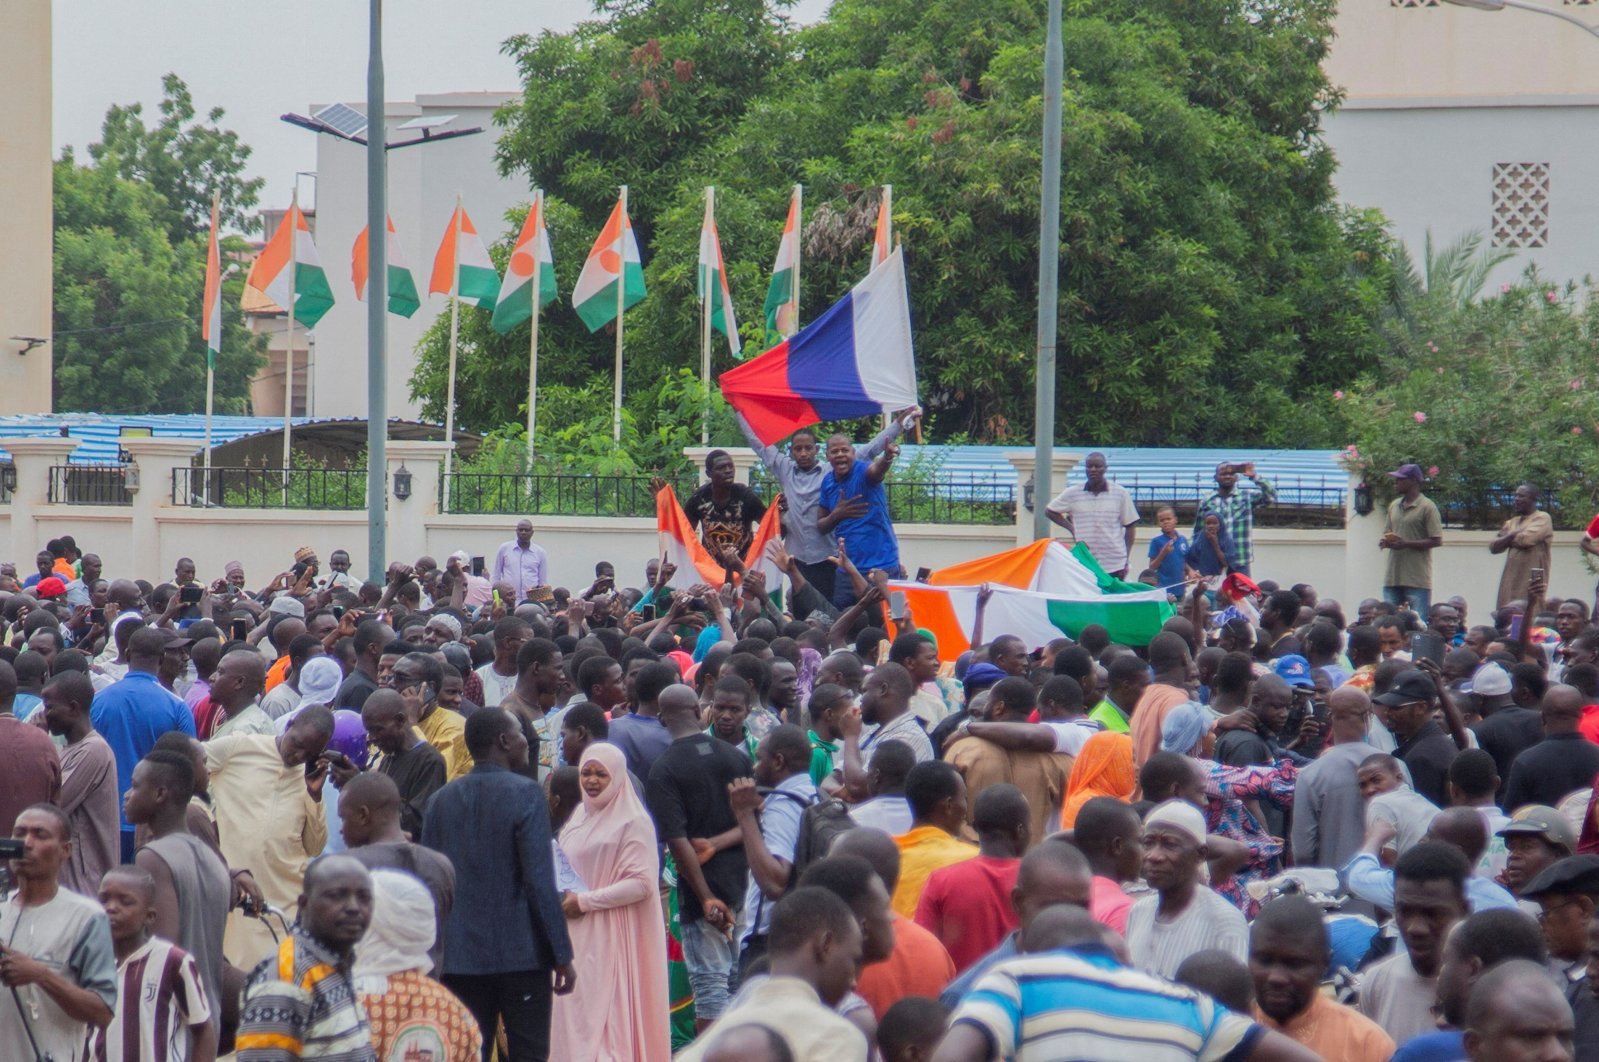 Hundreds of coup supporters gather and hold a Russian flag in front of the National Assembly in the capital Niamey, Niger, July 27, 2023. (Reuters Photo)